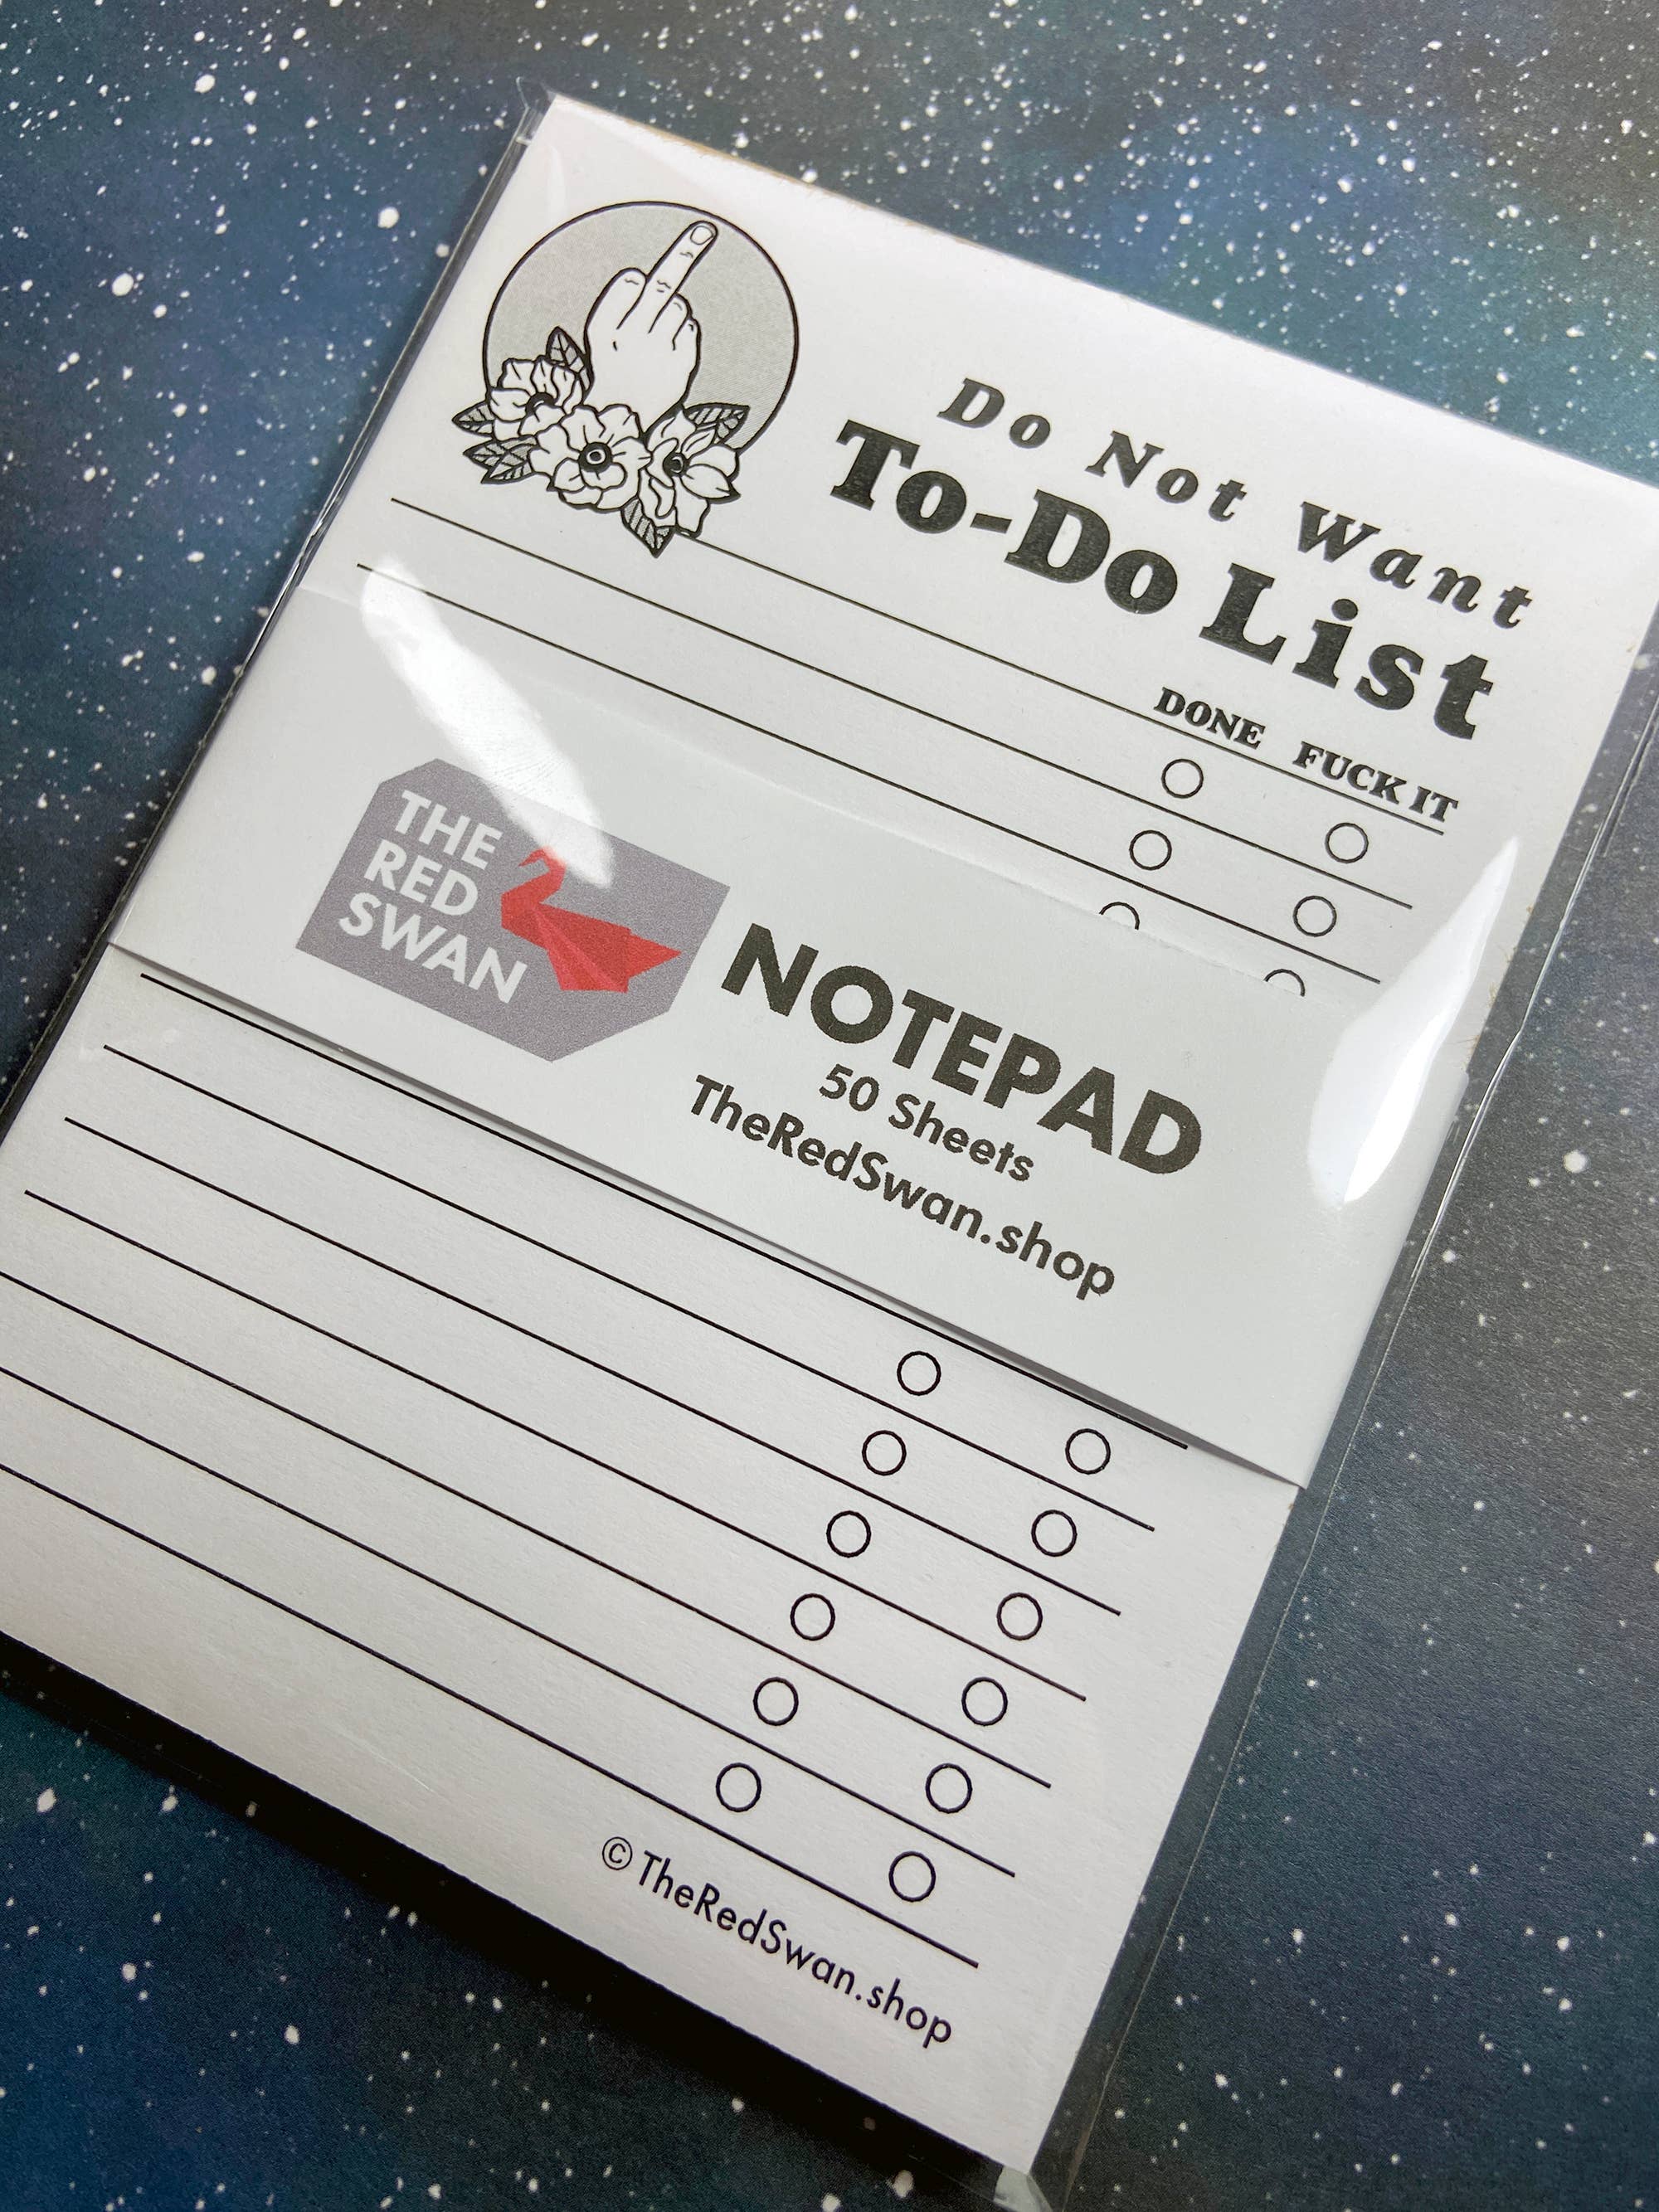 Do Not Want To Do Notepad